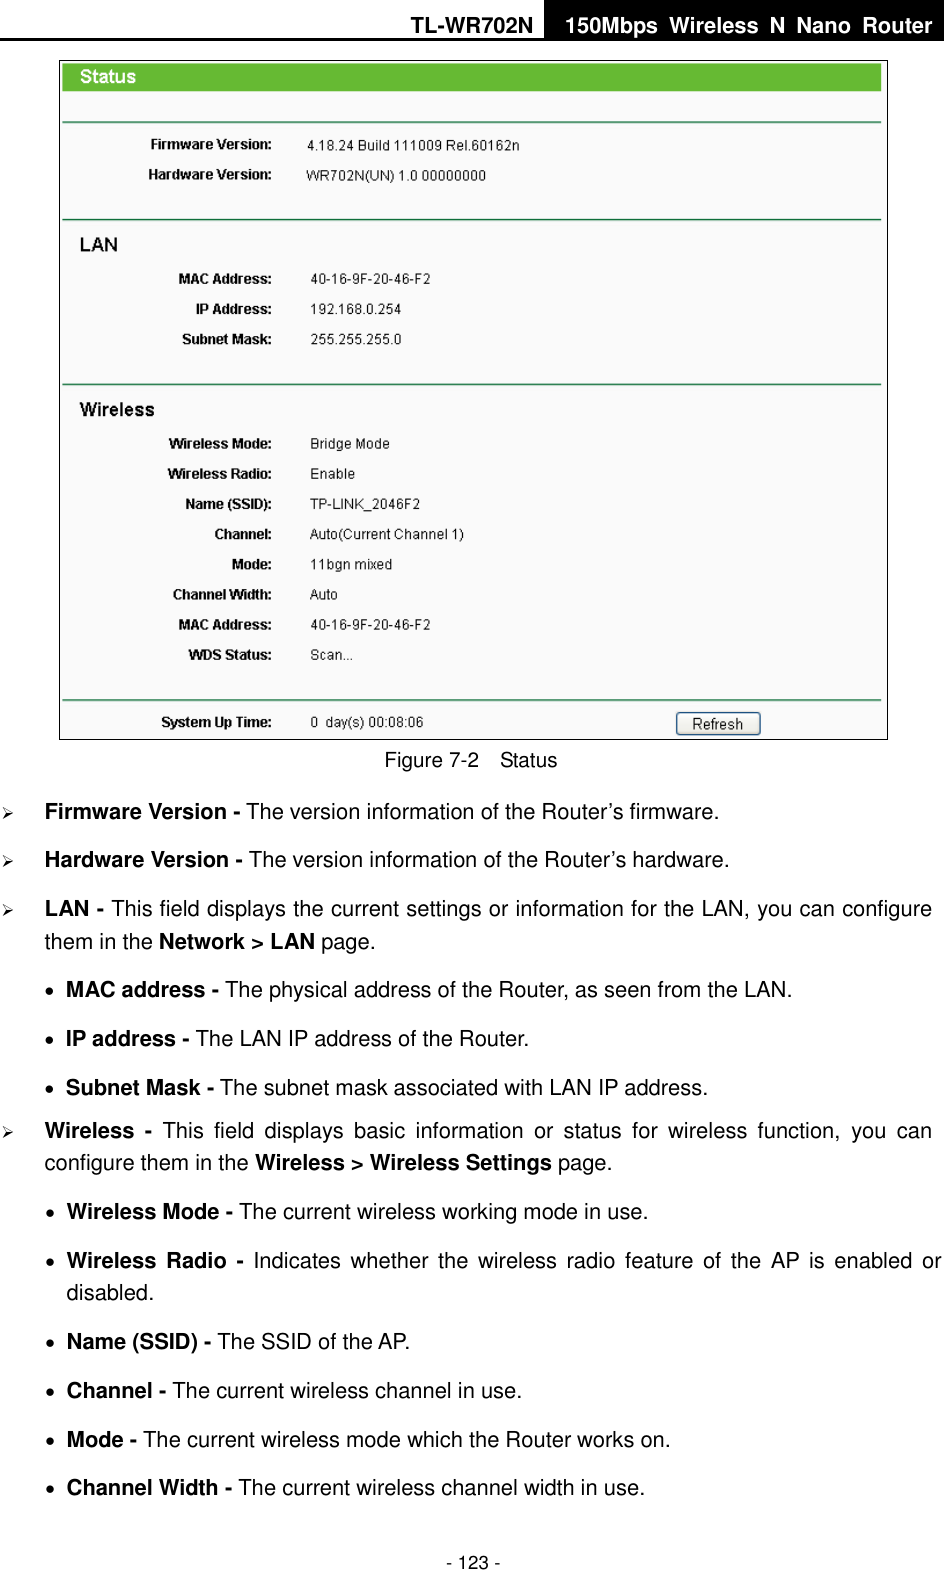 TL-WR702N 150Mbps  Wireless  N  Nano  Router  - 123 -  Figure 7-2  Status  Firmware Version - The version information of the Router’s firmware.  Hardware Version - The version information of the Router’s hardware.  LAN - This field displays the current settings or information for the LAN, you can configure them in the Network &gt; LAN page.    MAC address - The physical address of the Router, as seen from the LAN.  IP address - The LAN IP address of the Router.  Subnet Mask - The subnet mask associated with LAN IP address.  Wireless -  This  field  displays  basic  information  or  status  for  wireless  function,  you  can configure them in the Wireless &gt; Wireless Settings page.    Wireless Mode - The current wireless working mode in use.  Wireless Radio -  Indicates whether  the wireless radio  feature of the  AP is  enabled or disabled.  Name (SSID) - The SSID of the AP.  Channel - The current wireless channel in use.  Mode - The current wireless mode which the Router works on.  Channel Width - The current wireless channel width in use. 